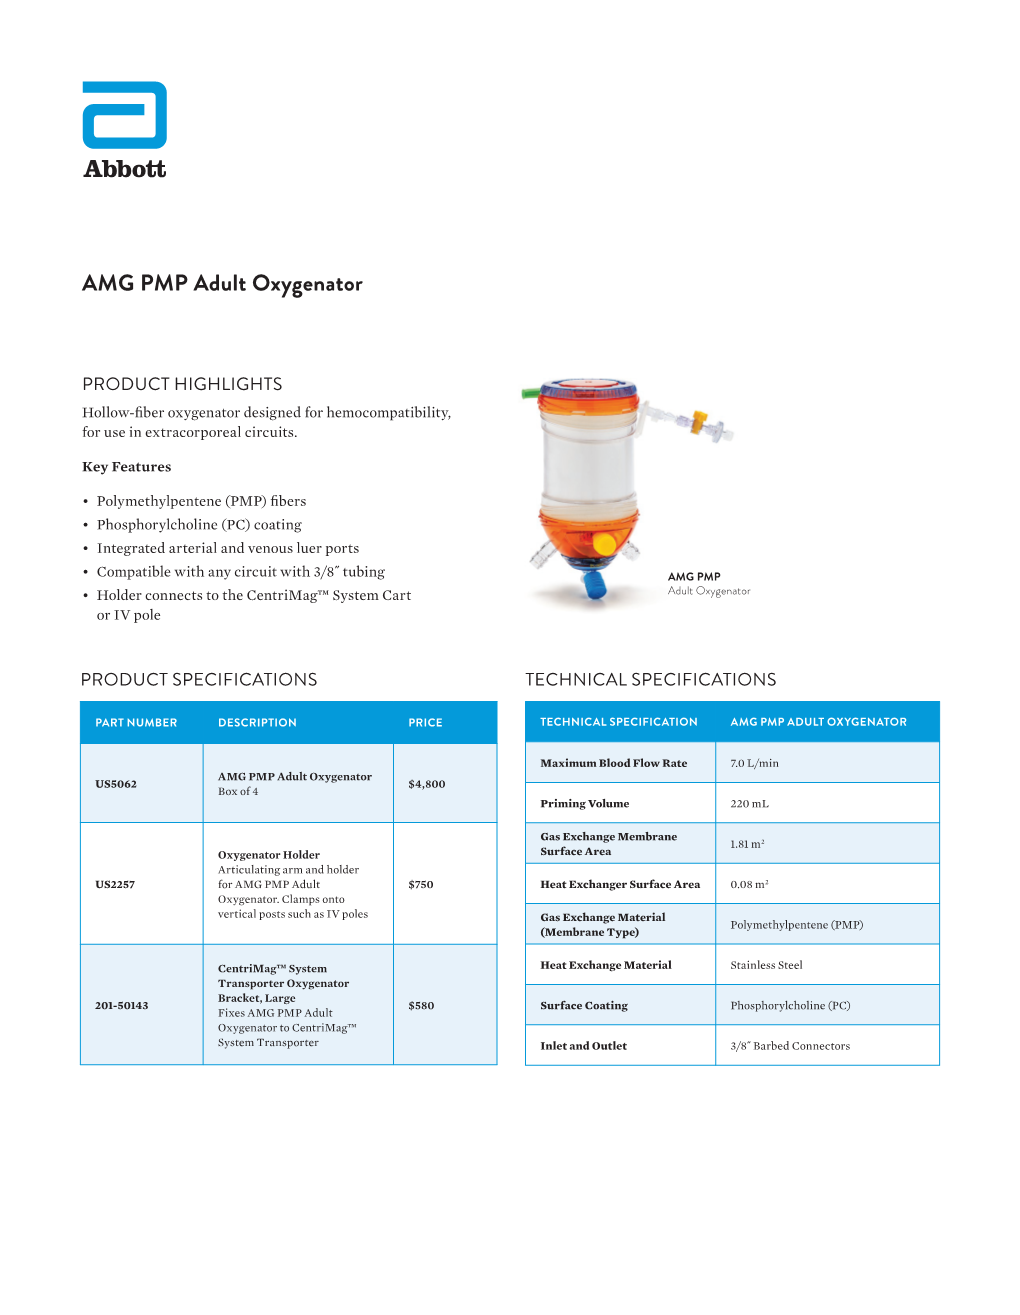 AMG PMP Adult Oxygenator Product Highlights, Product Specifications and Product List